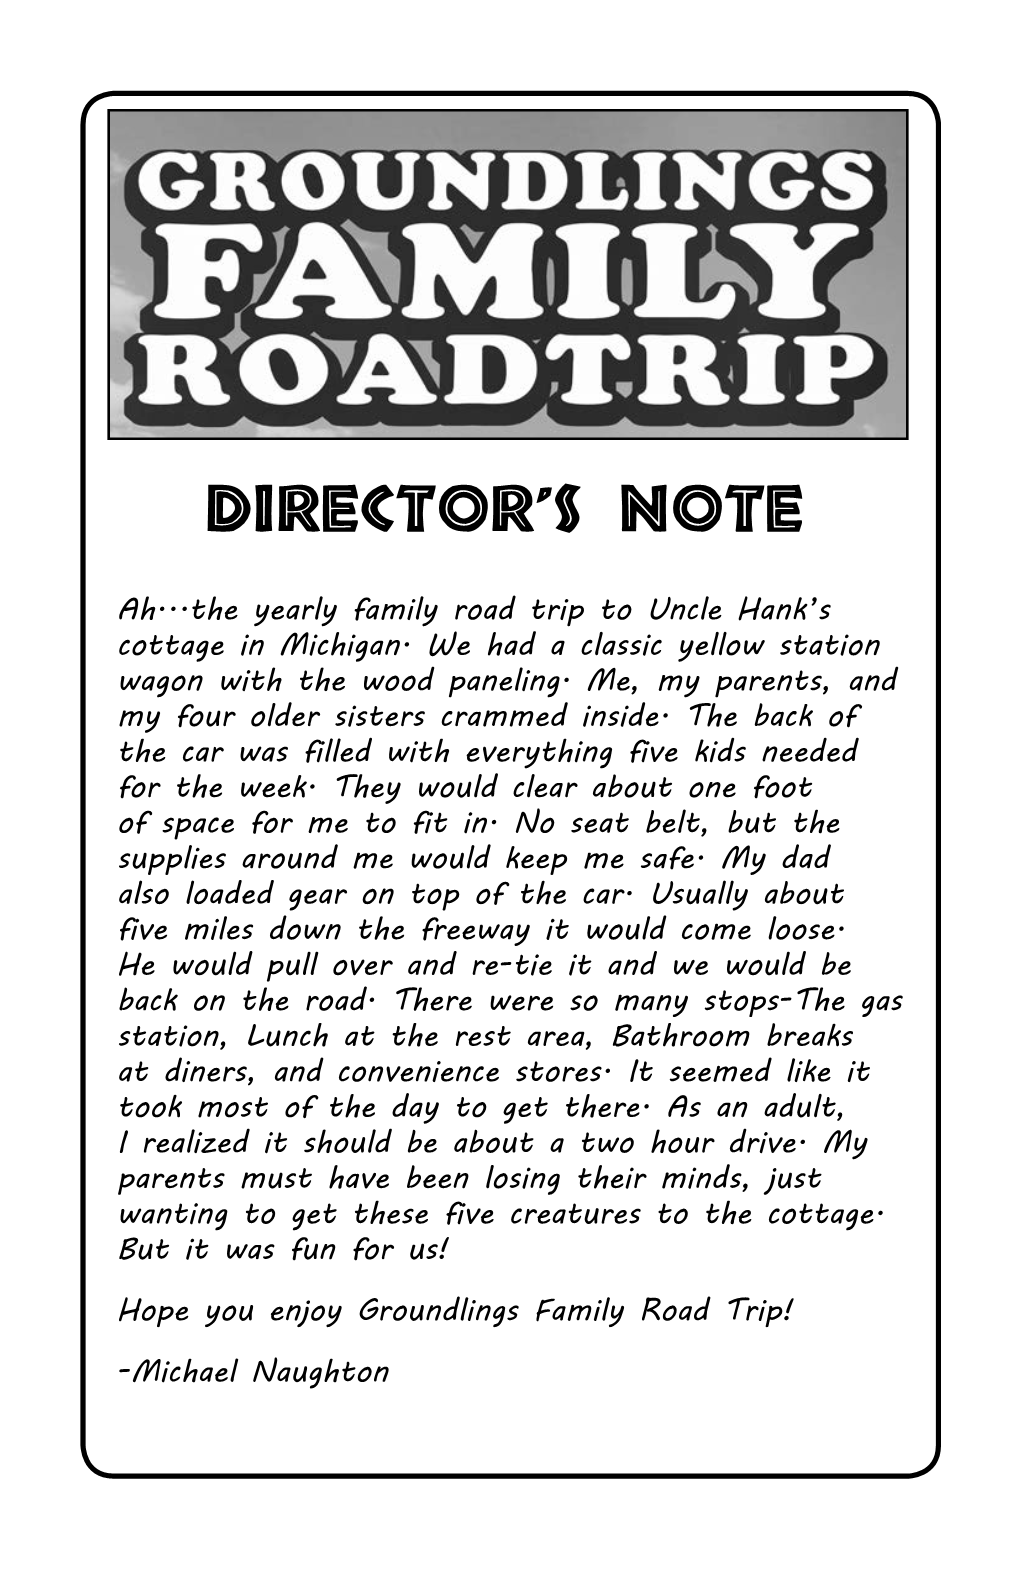 Director's Note